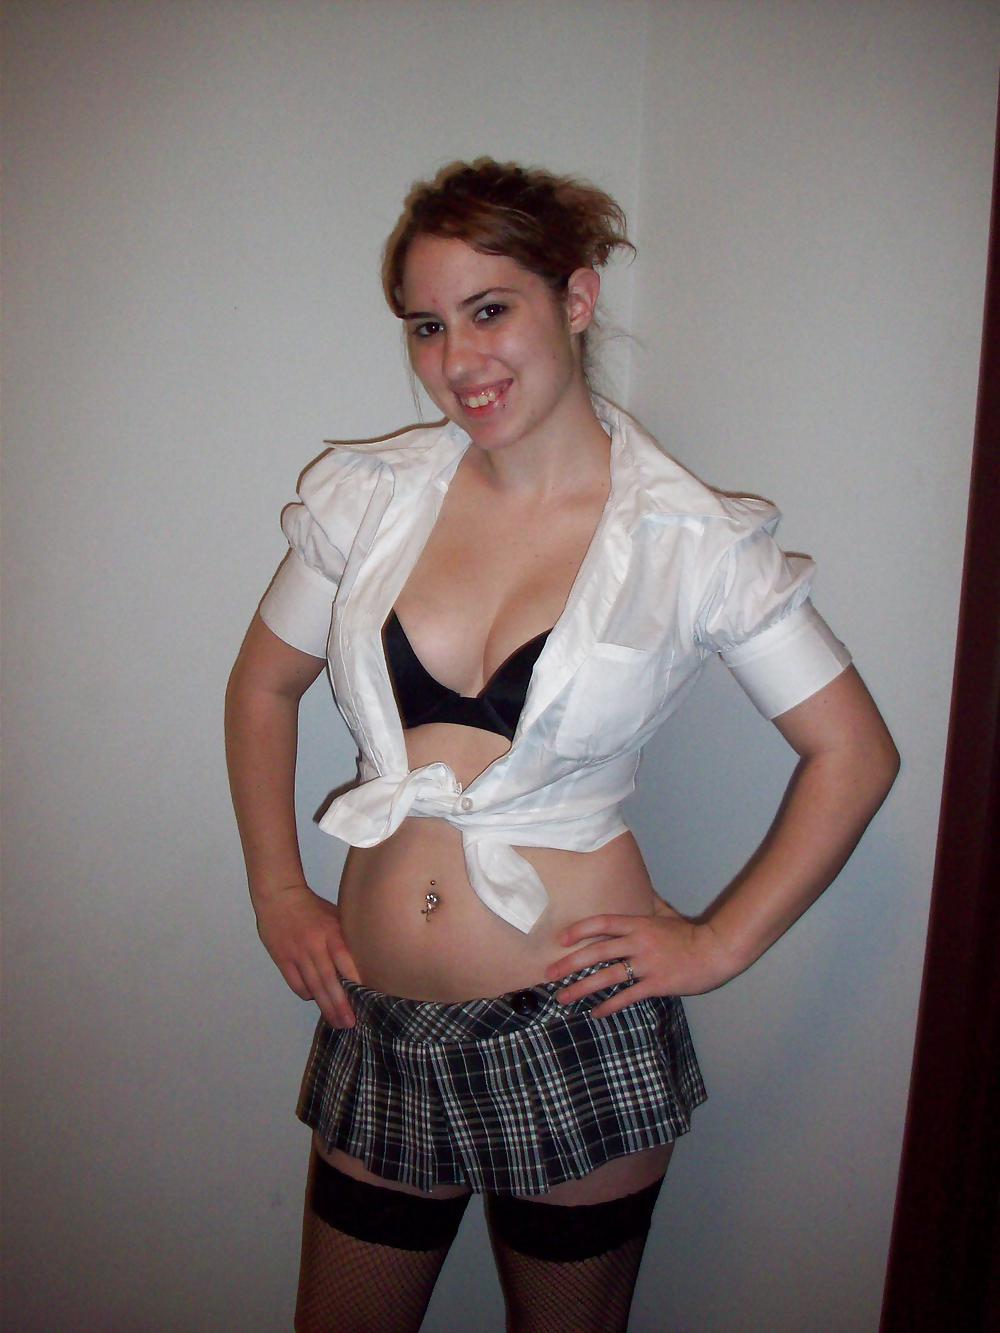 AMATEUR IN SCHOOLGIRL OUTFIT adult photos